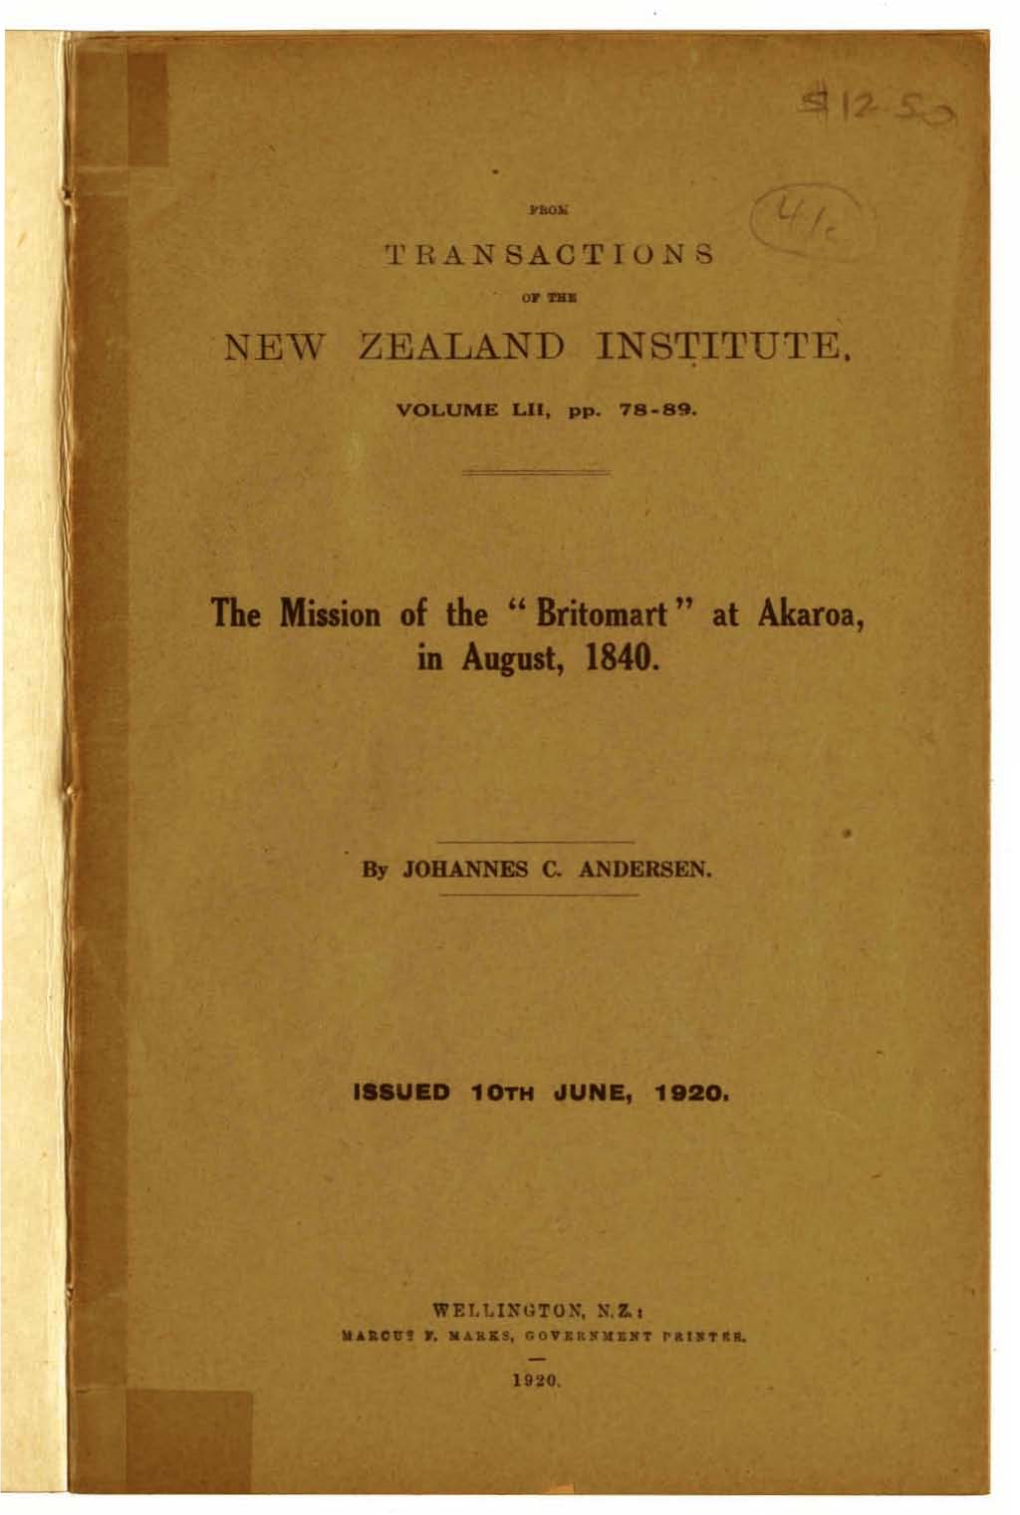 The Mission of the Britomart at Akaroa, in August 1840